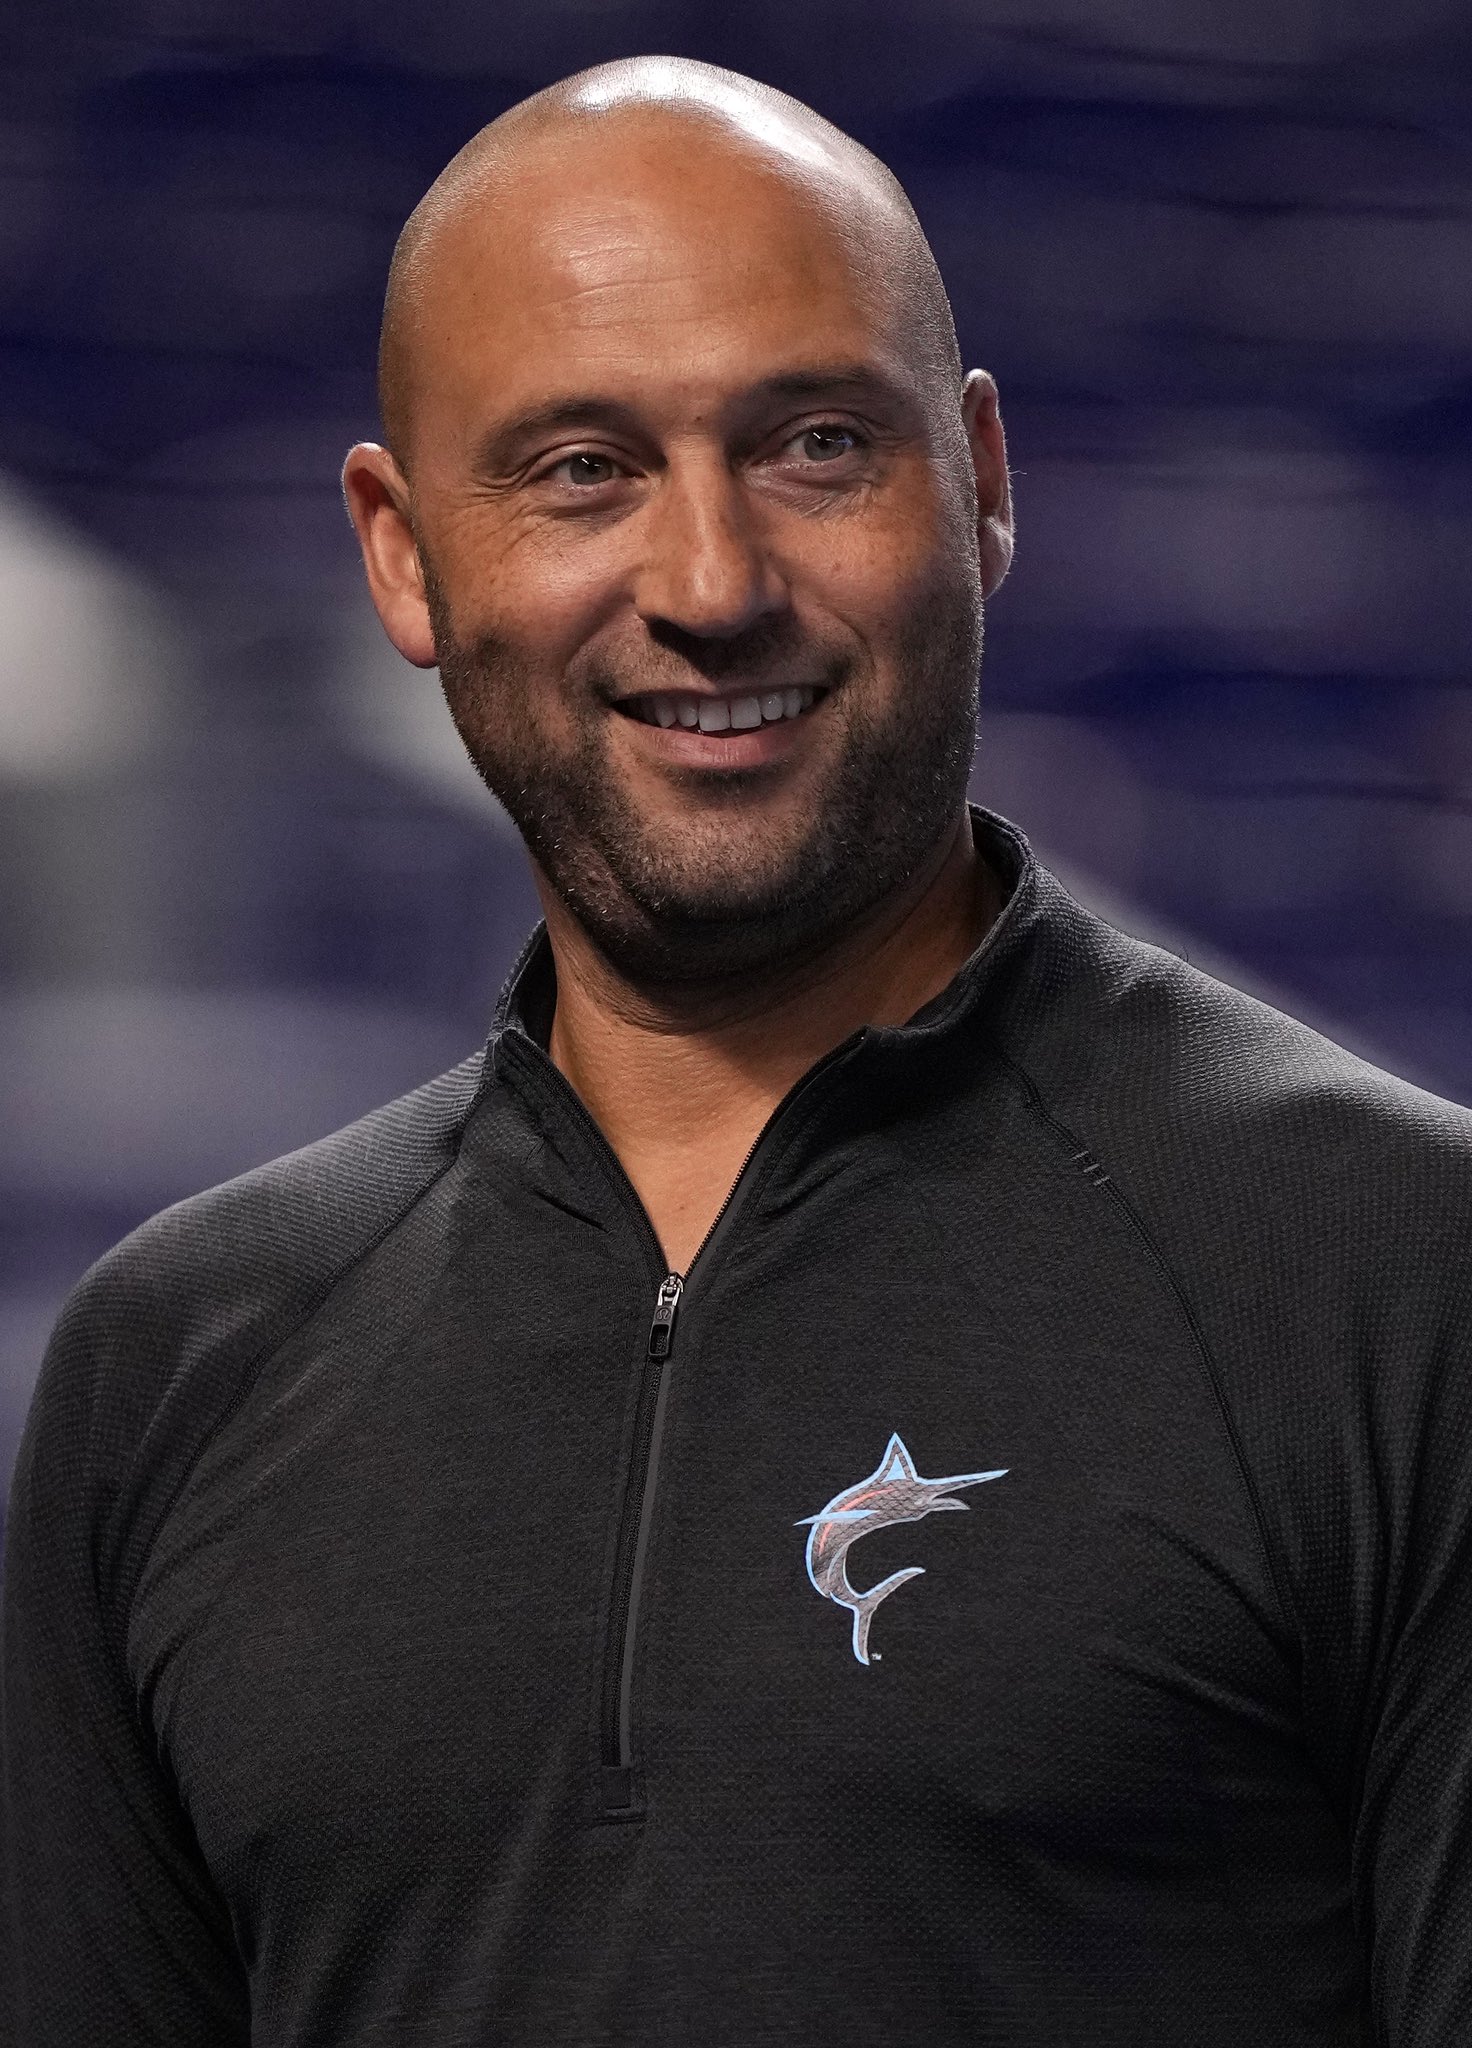 Stadium on X: “The vision for the future of the franchise is different  than the one I signed up to lead.” Derek Jeter announces he is stepping  down from the Marlins' CEO